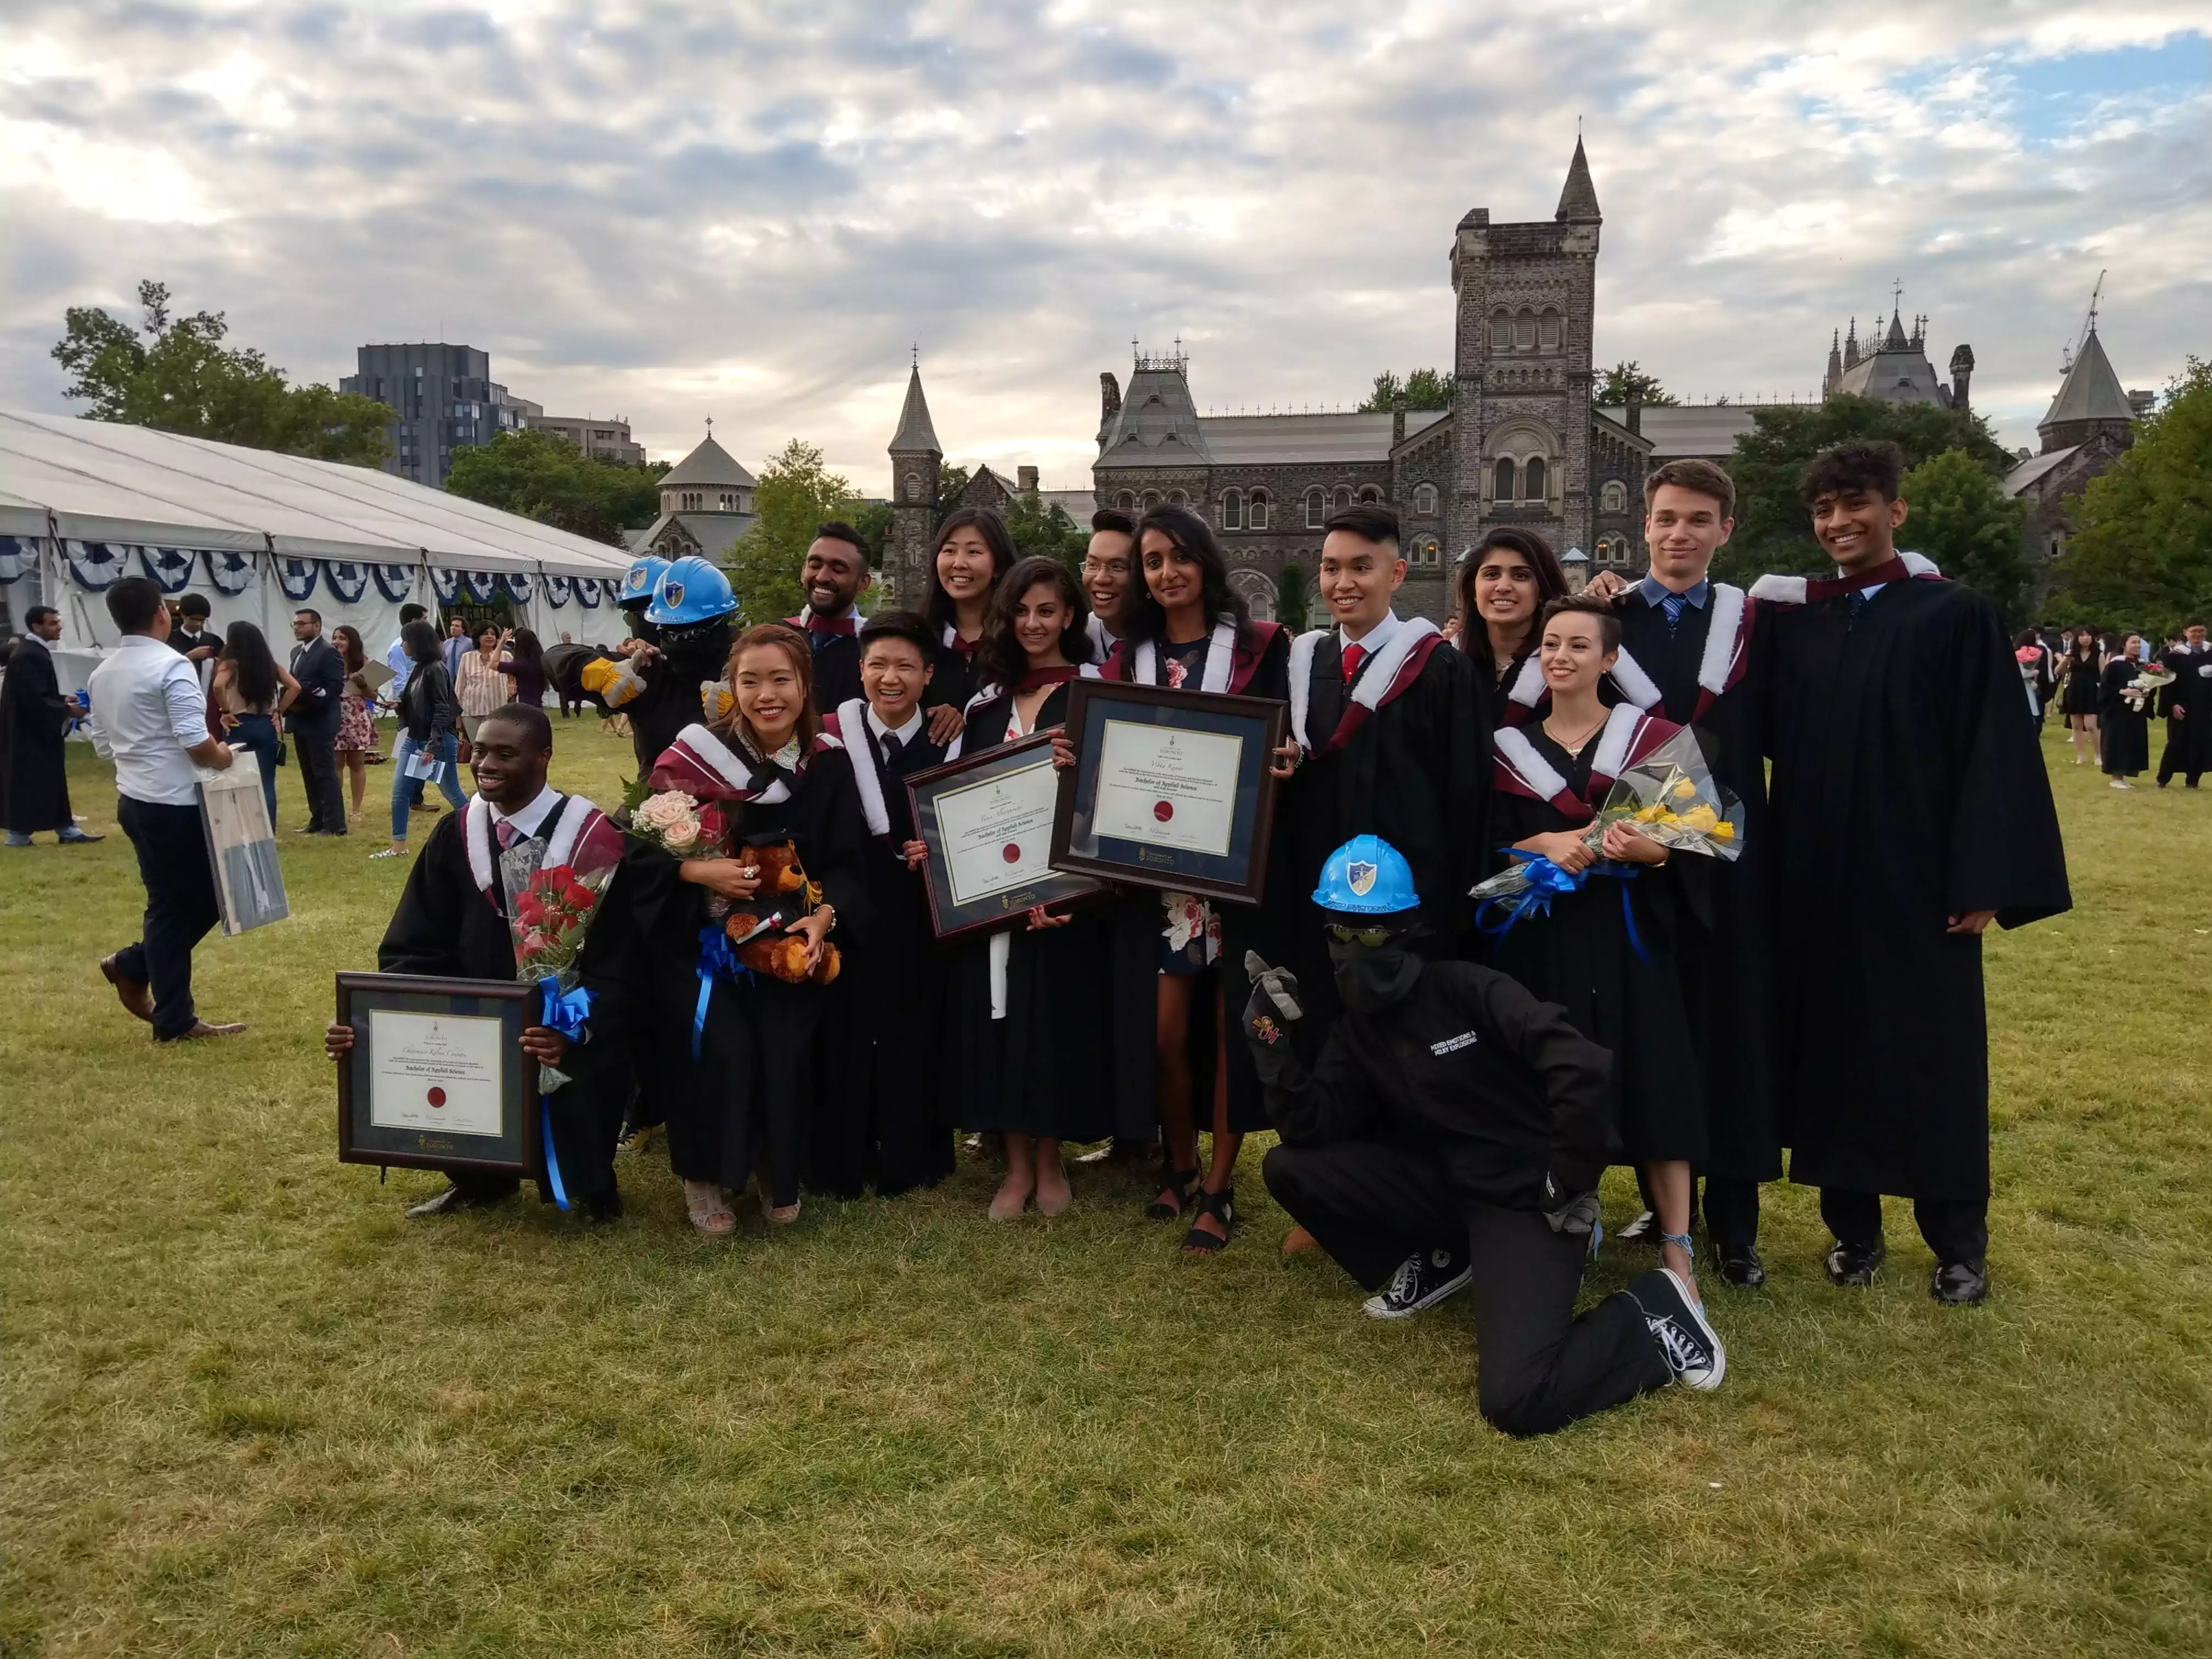 Students in graduation robes posing for a group photo on Kings College Circle, University of Toronto